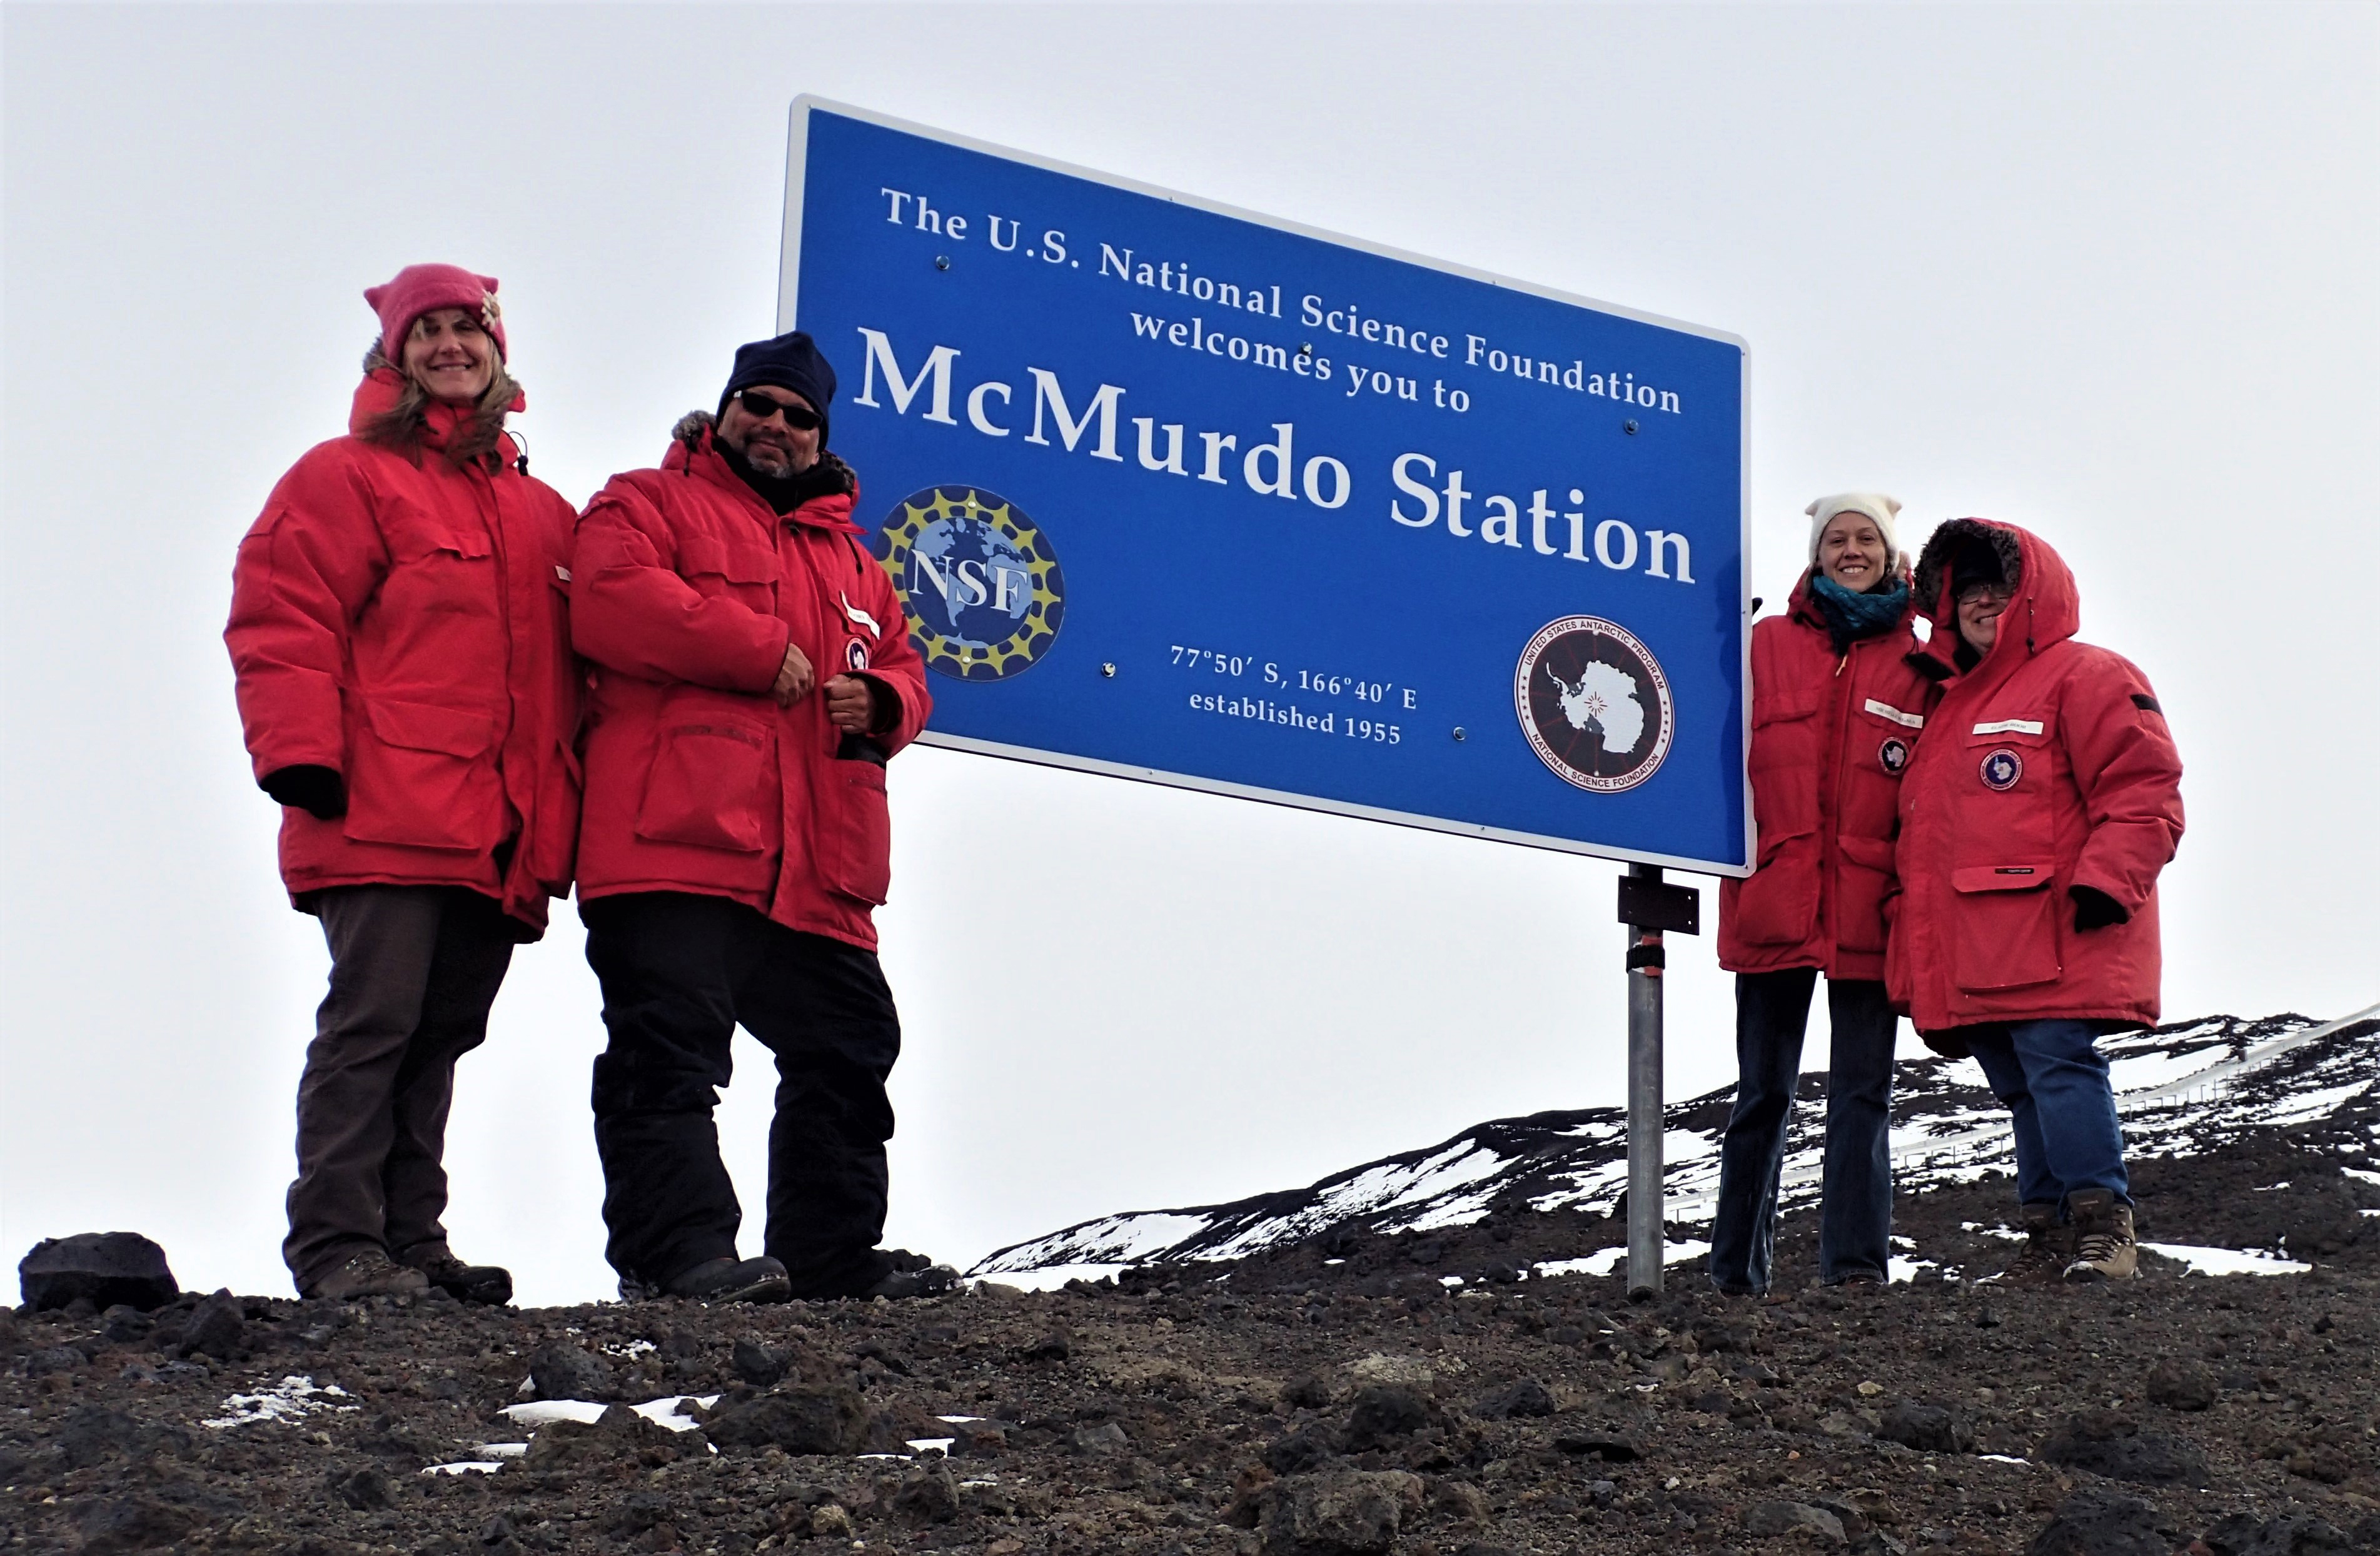 Four people in red winter parkas stand next to a large blue sign.